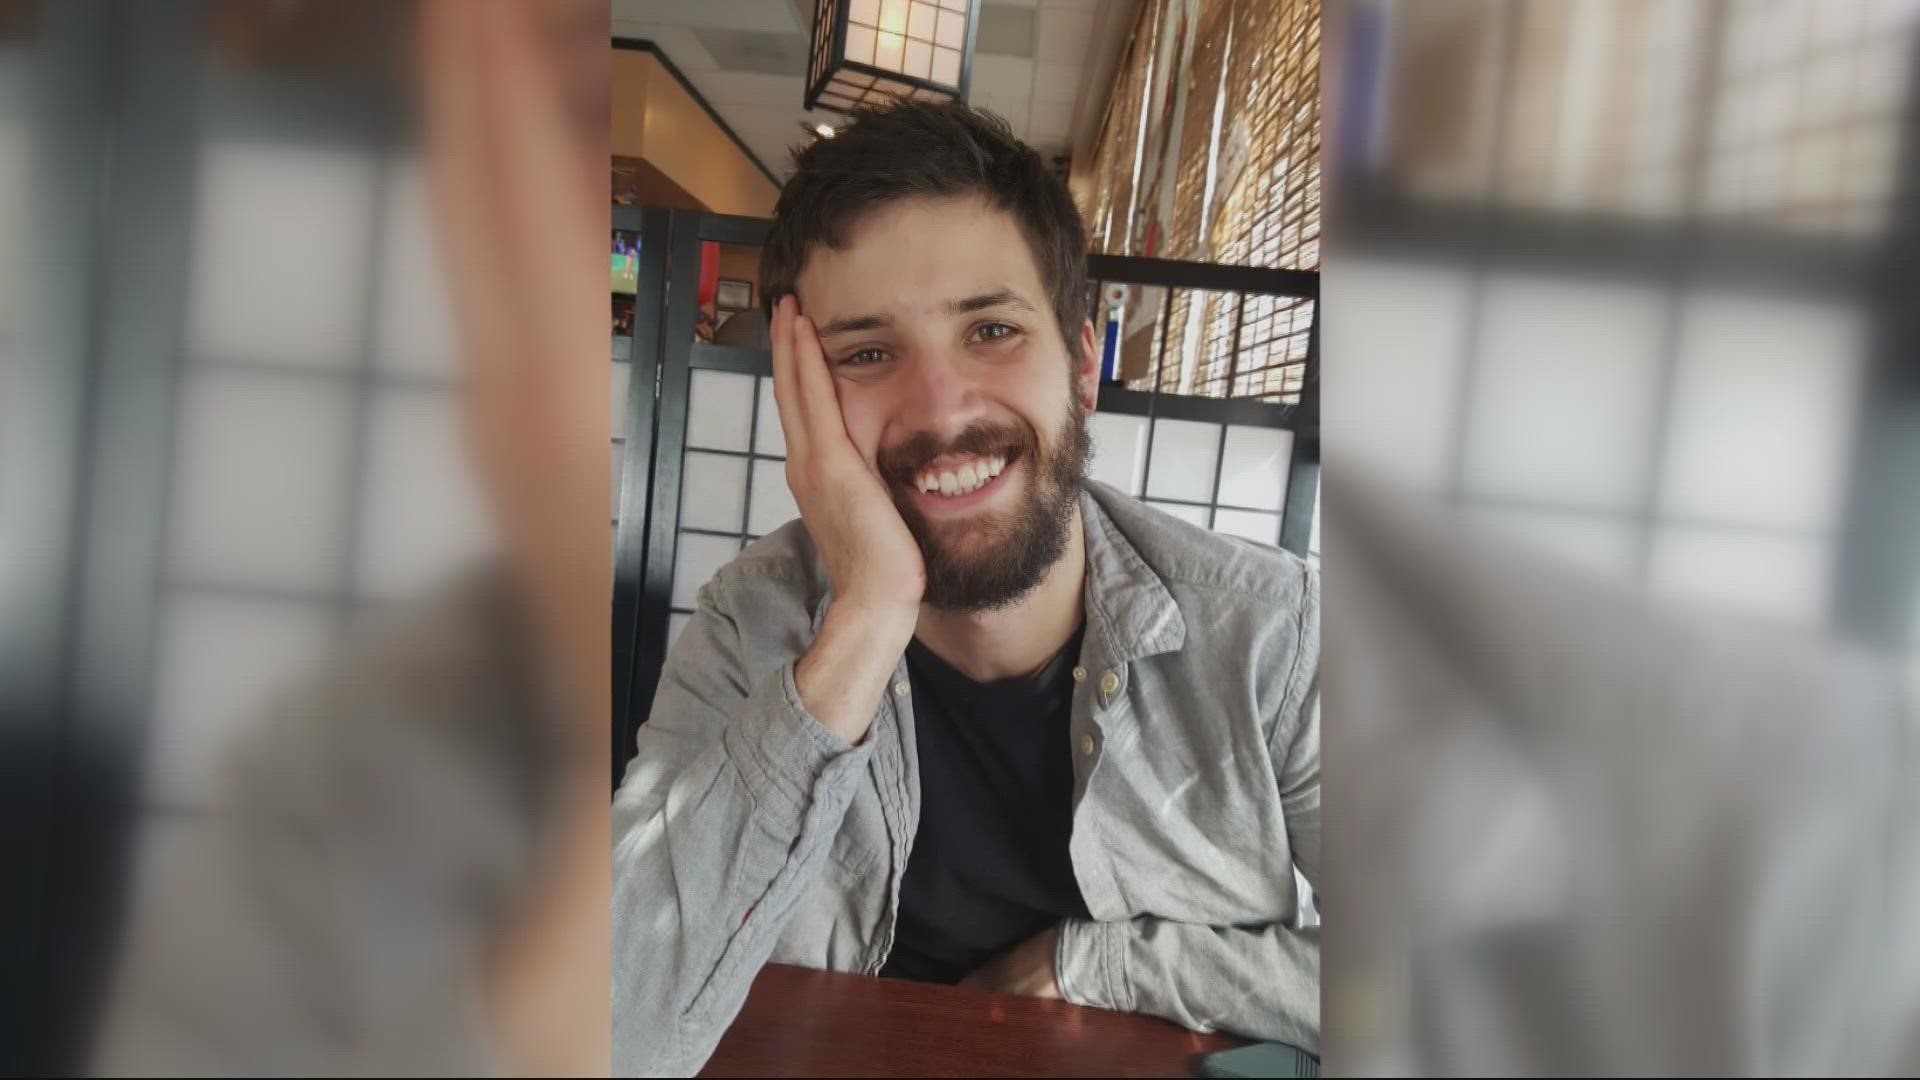 Kyle Kirchem drove away from his home in an apparent mental health crisis on Nov. 20, leaving behind his cell phone. His family reported him missing two days later.